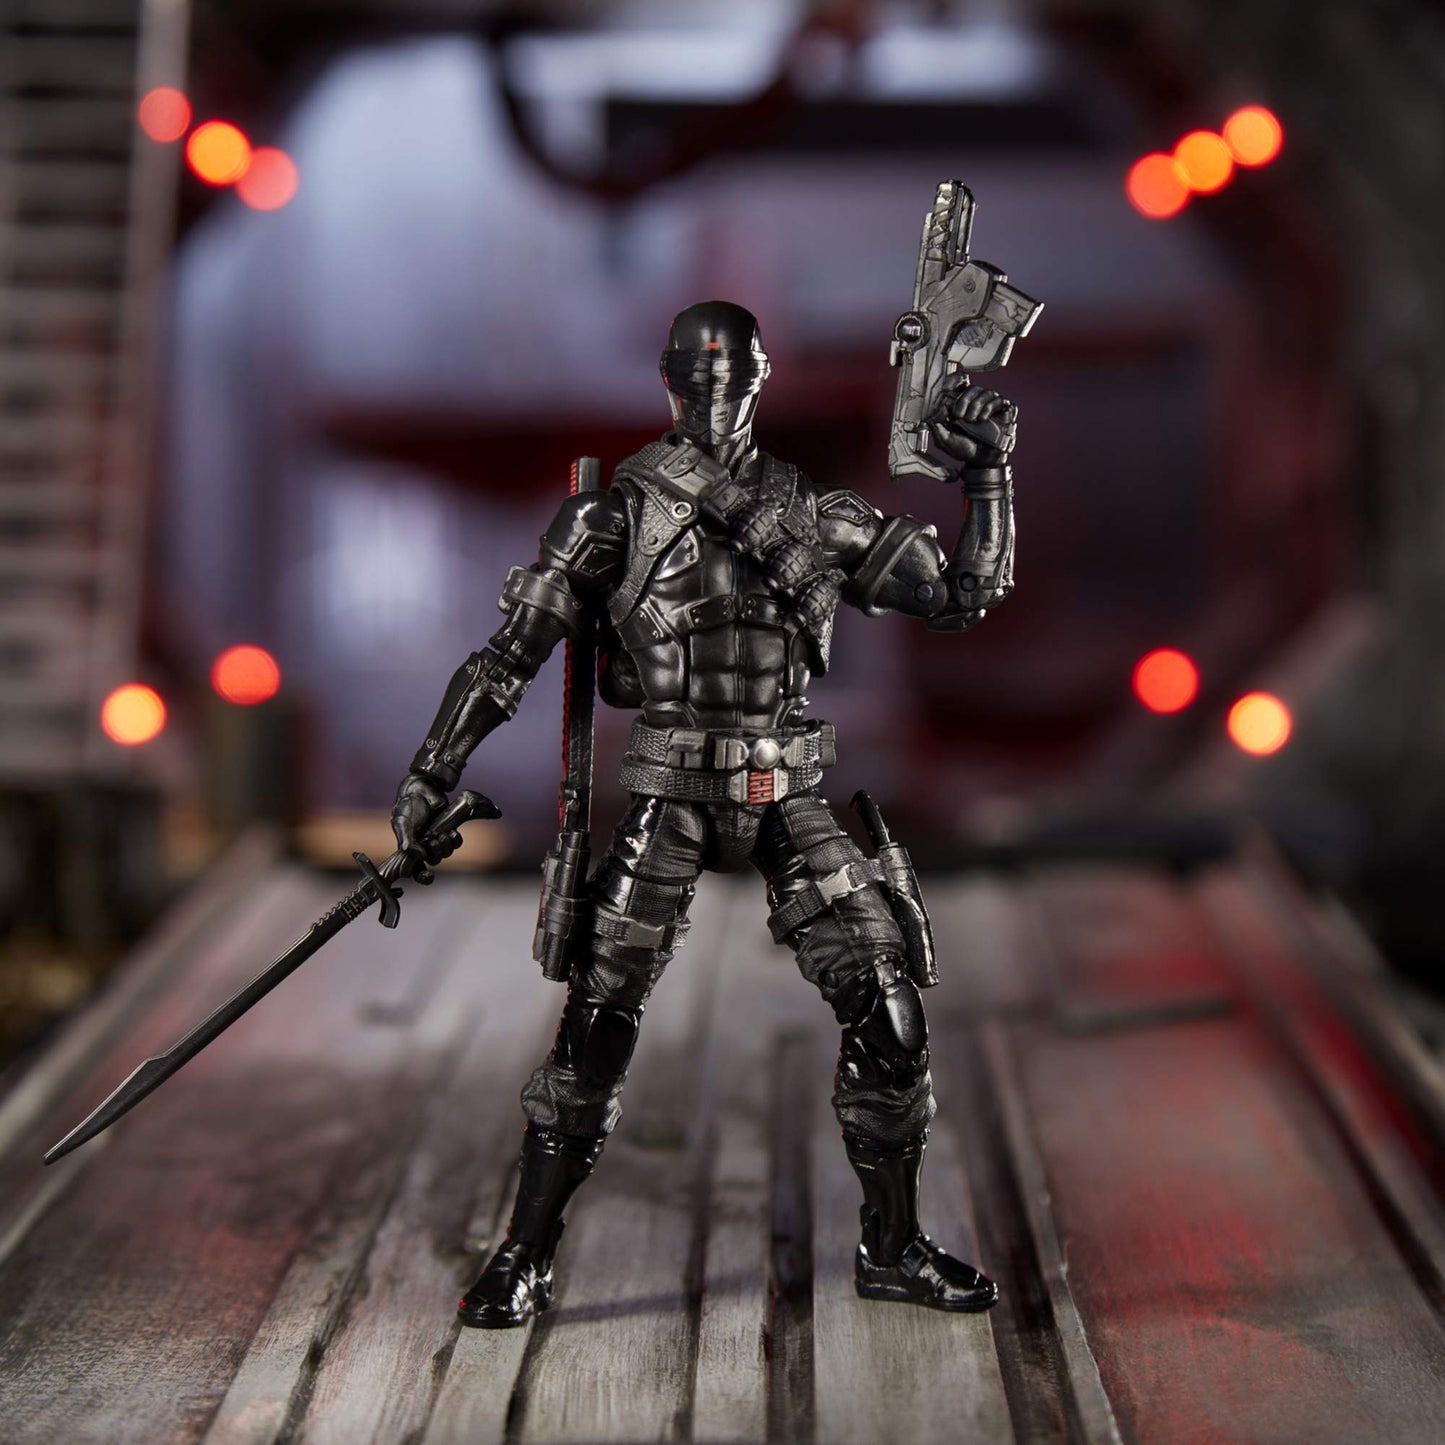 G.I. Joe Classified Series Snake Eyes Action Figure 02 Collectible Premium Toy with Multiple Accessories 6-Inch Scale with Custom Package Art